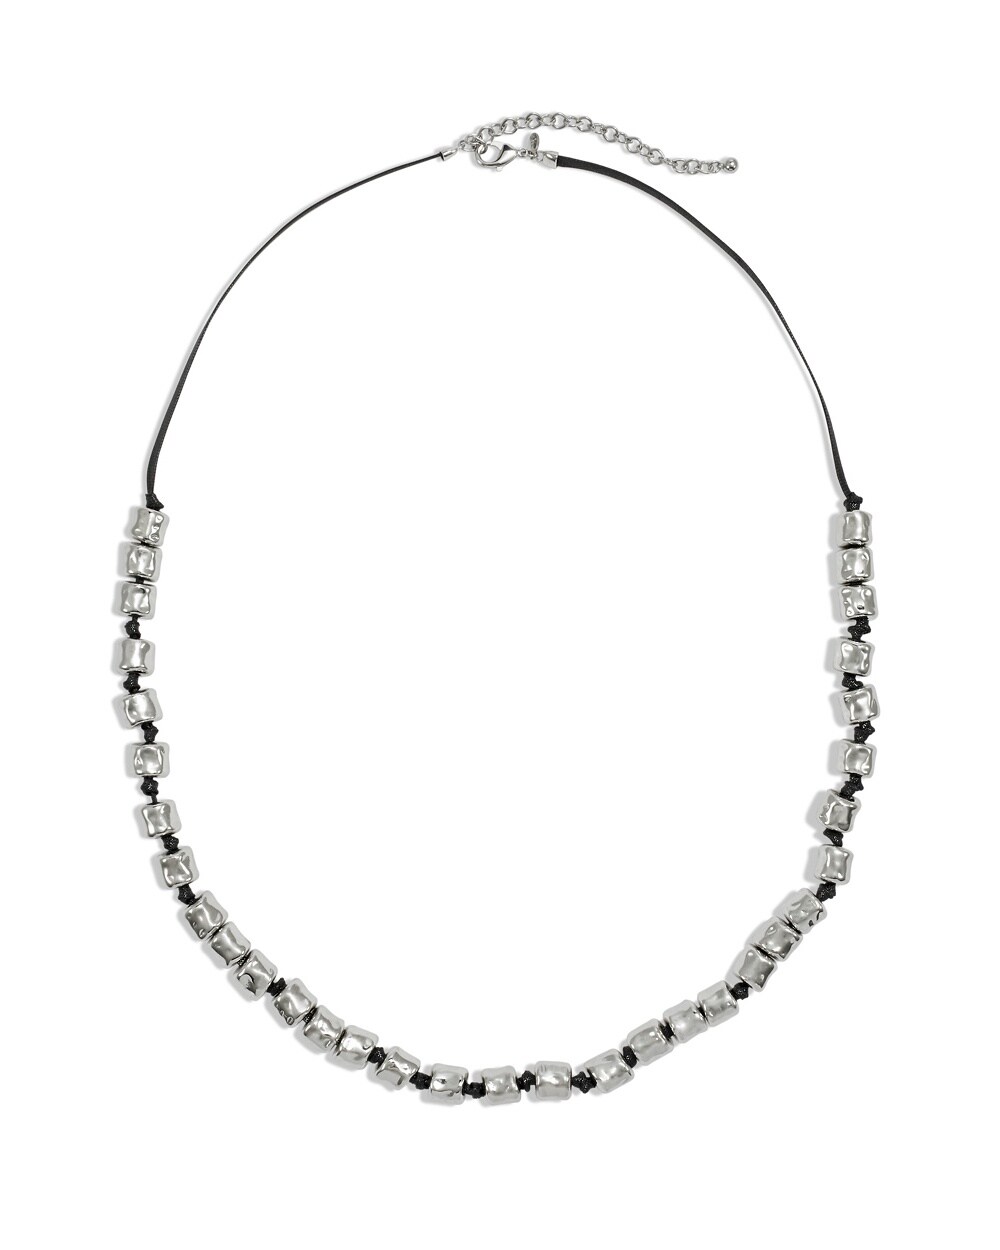 Karley Long Silver Bead Necklace